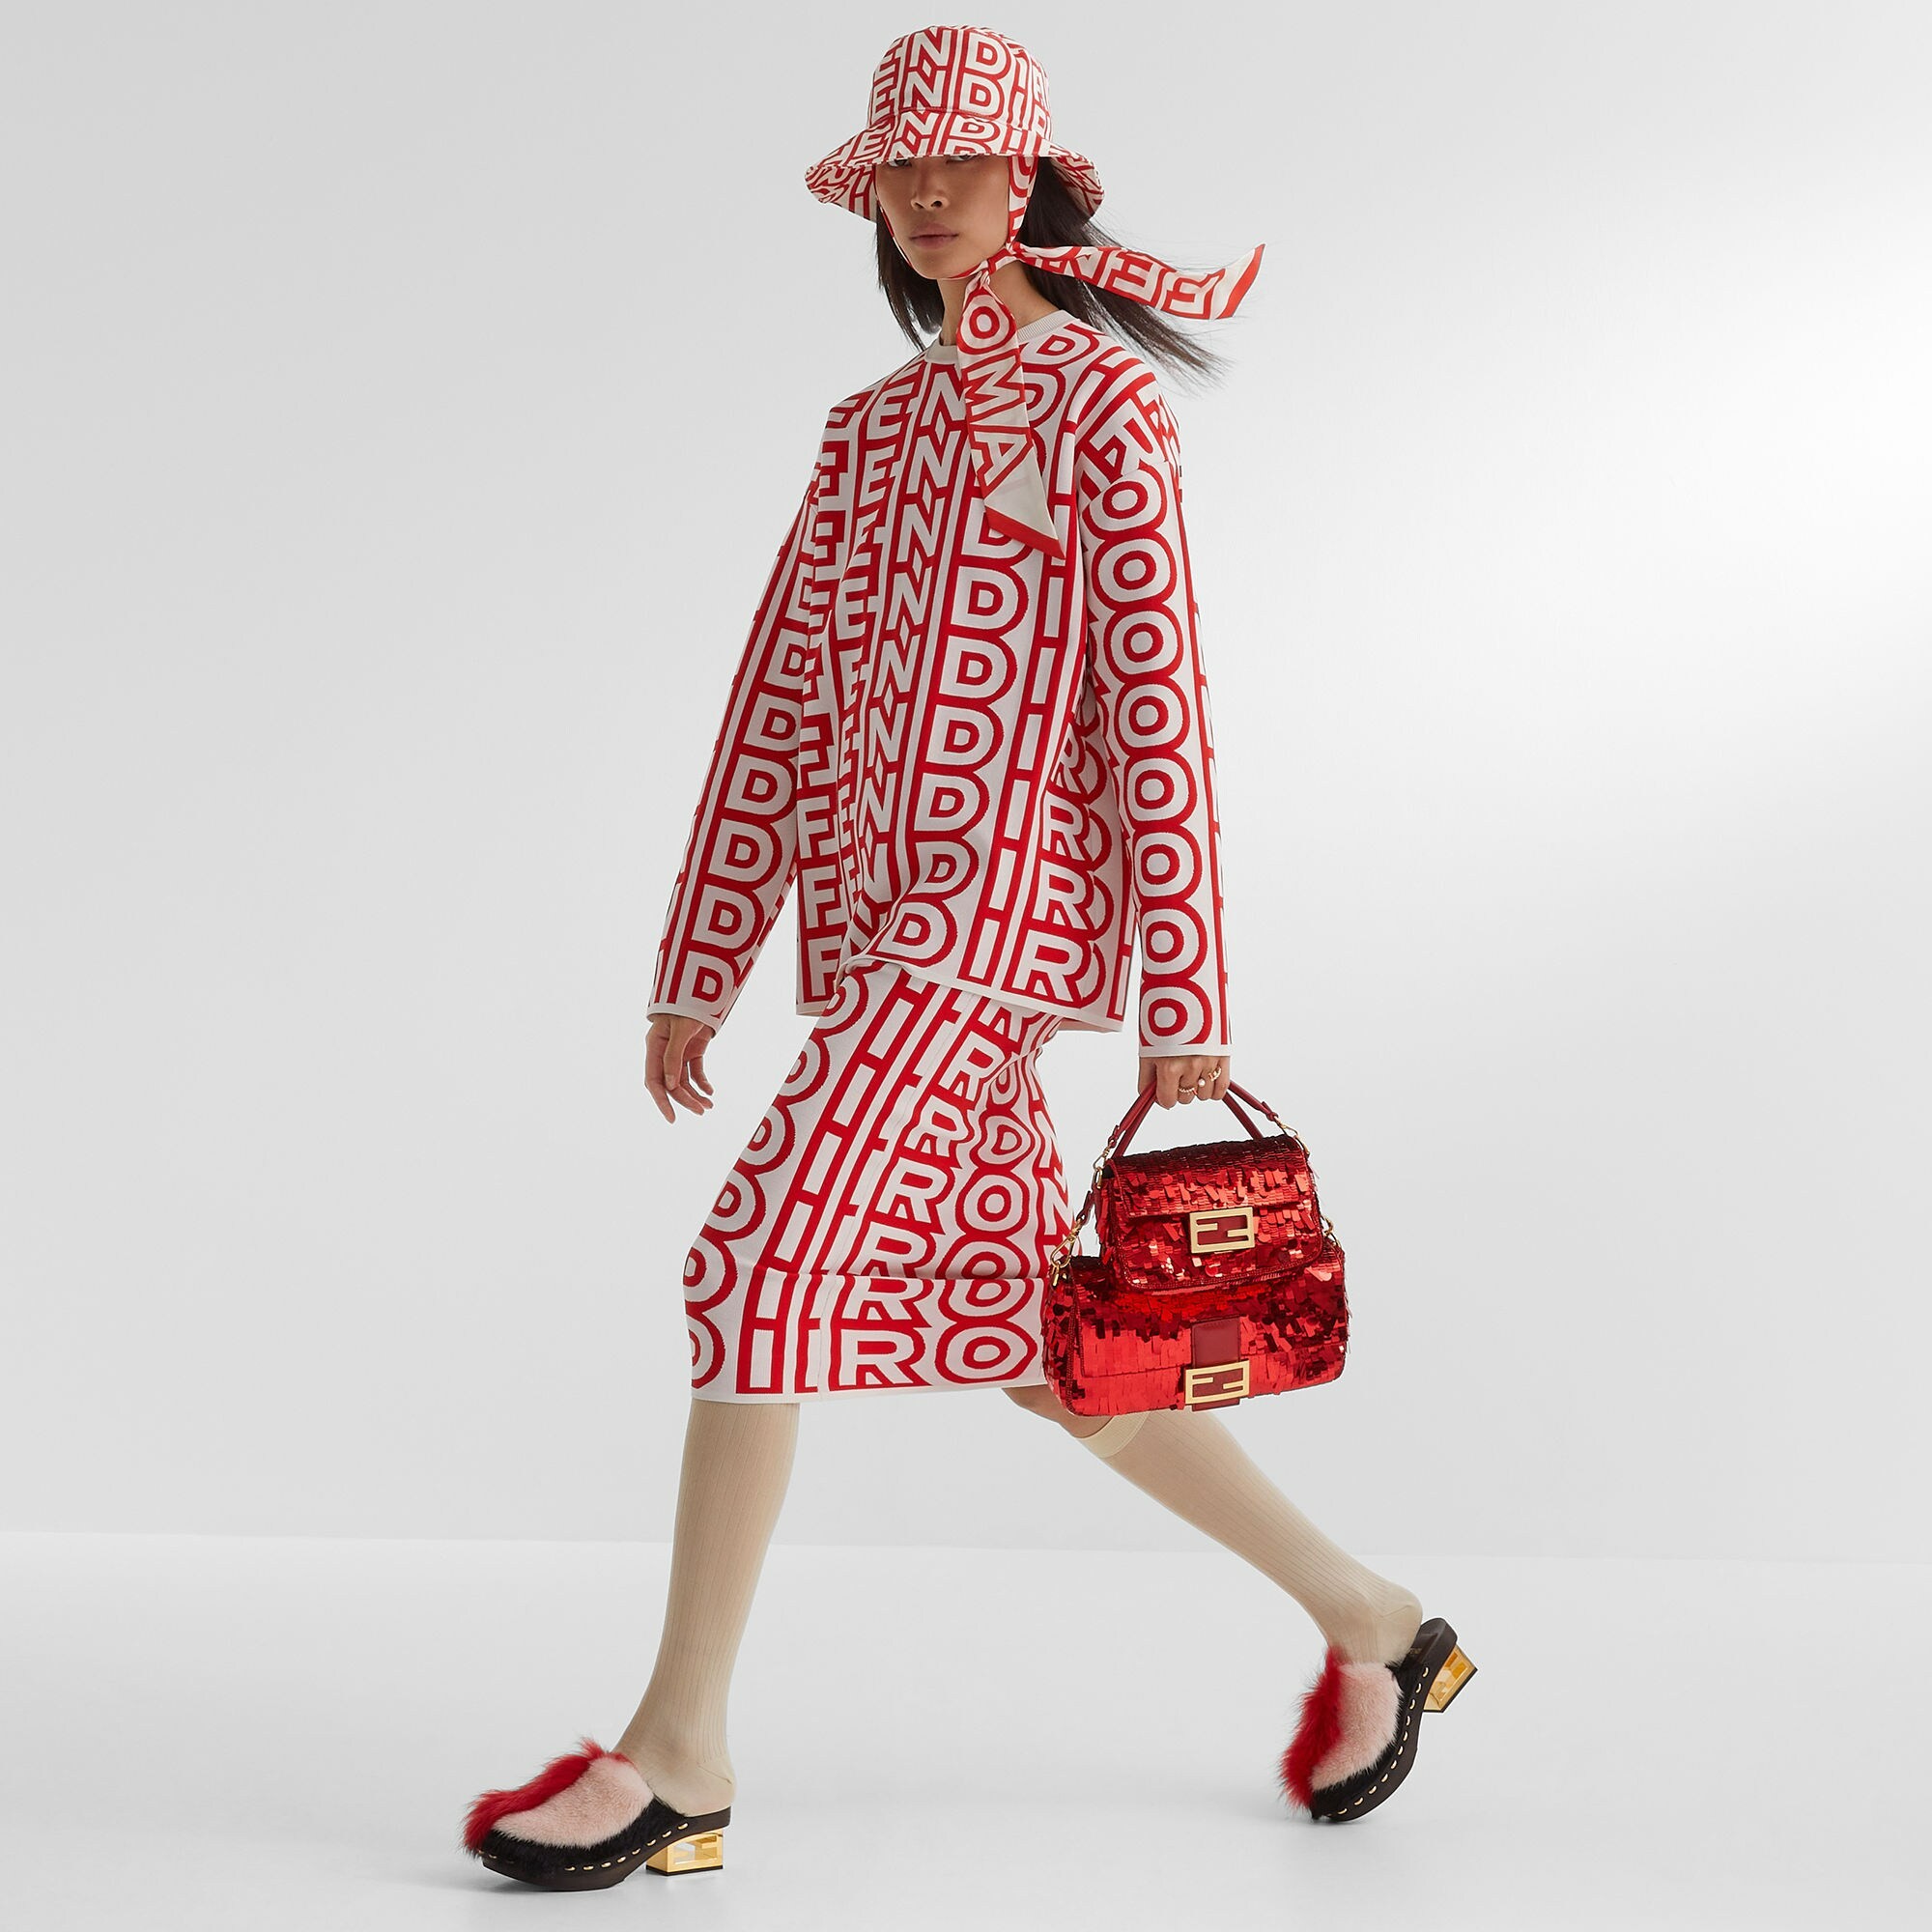 Image of a model wearing a matching red and white fendi set featuring a bucket hat, oversized jacket and skirt. She holds two sparkly red Fendi baguette bags (one is smaller) and wears red, white and black furry clogs.